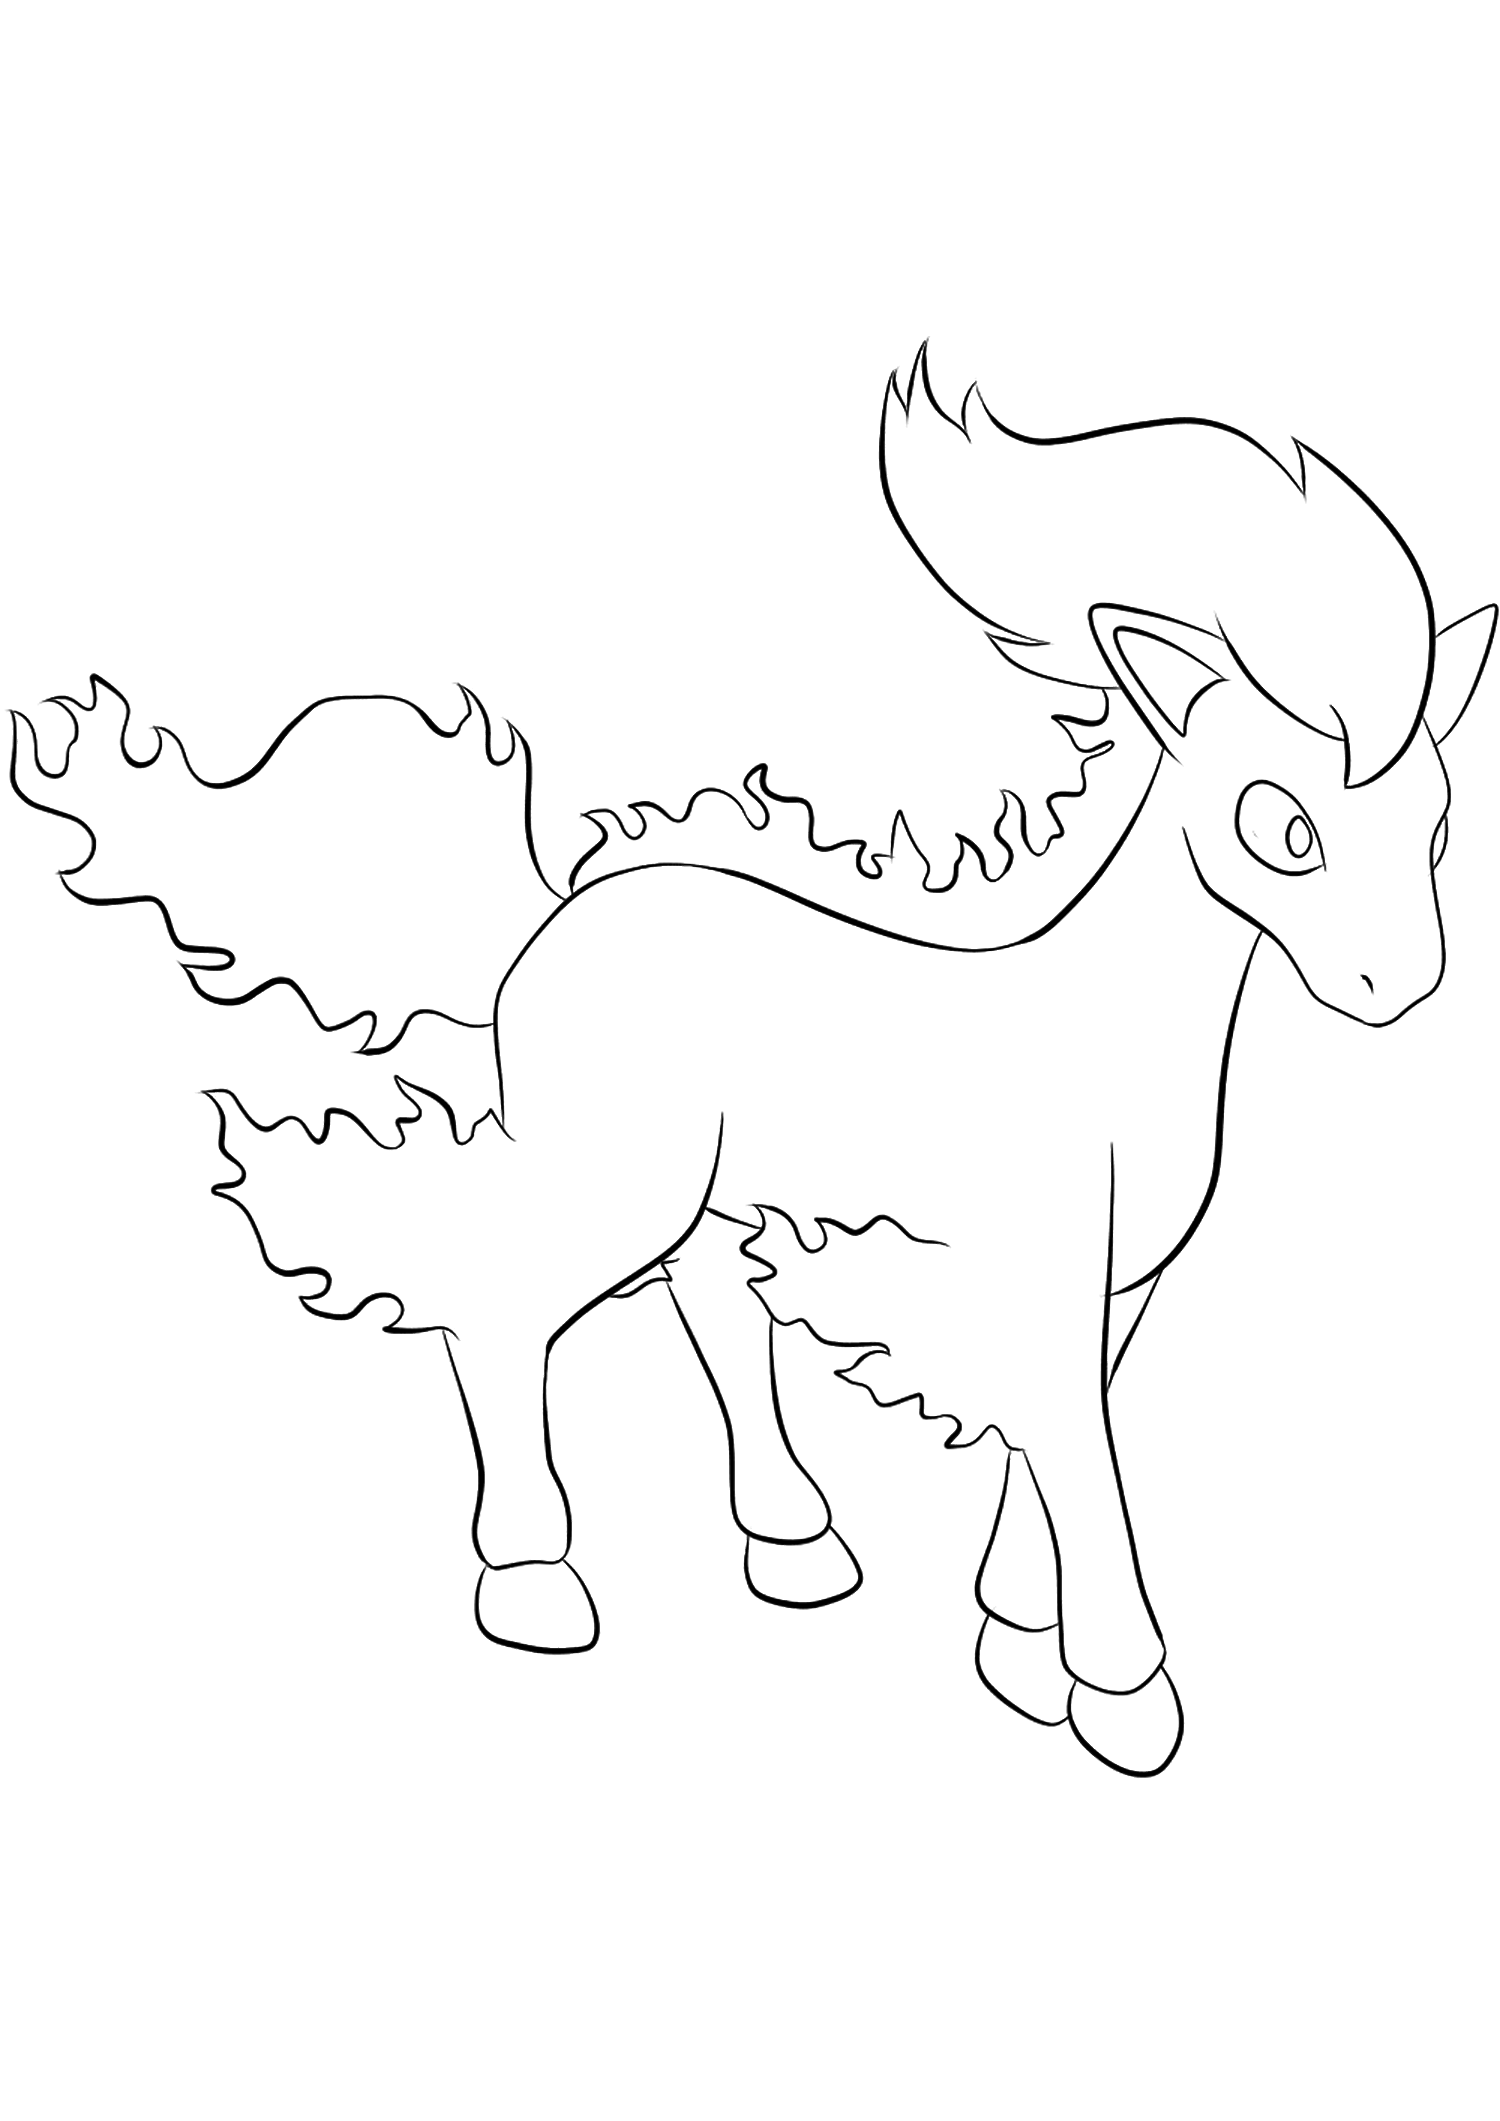 Ponyta (No.77). Ponyta Coloring page, Generation I Pokemon of type FireOriginal image credit: Pokemon linearts by Lilly Gerbil on Deviantart.Permission:  All rights reserved © Pokemon company and Ken Sugimori.